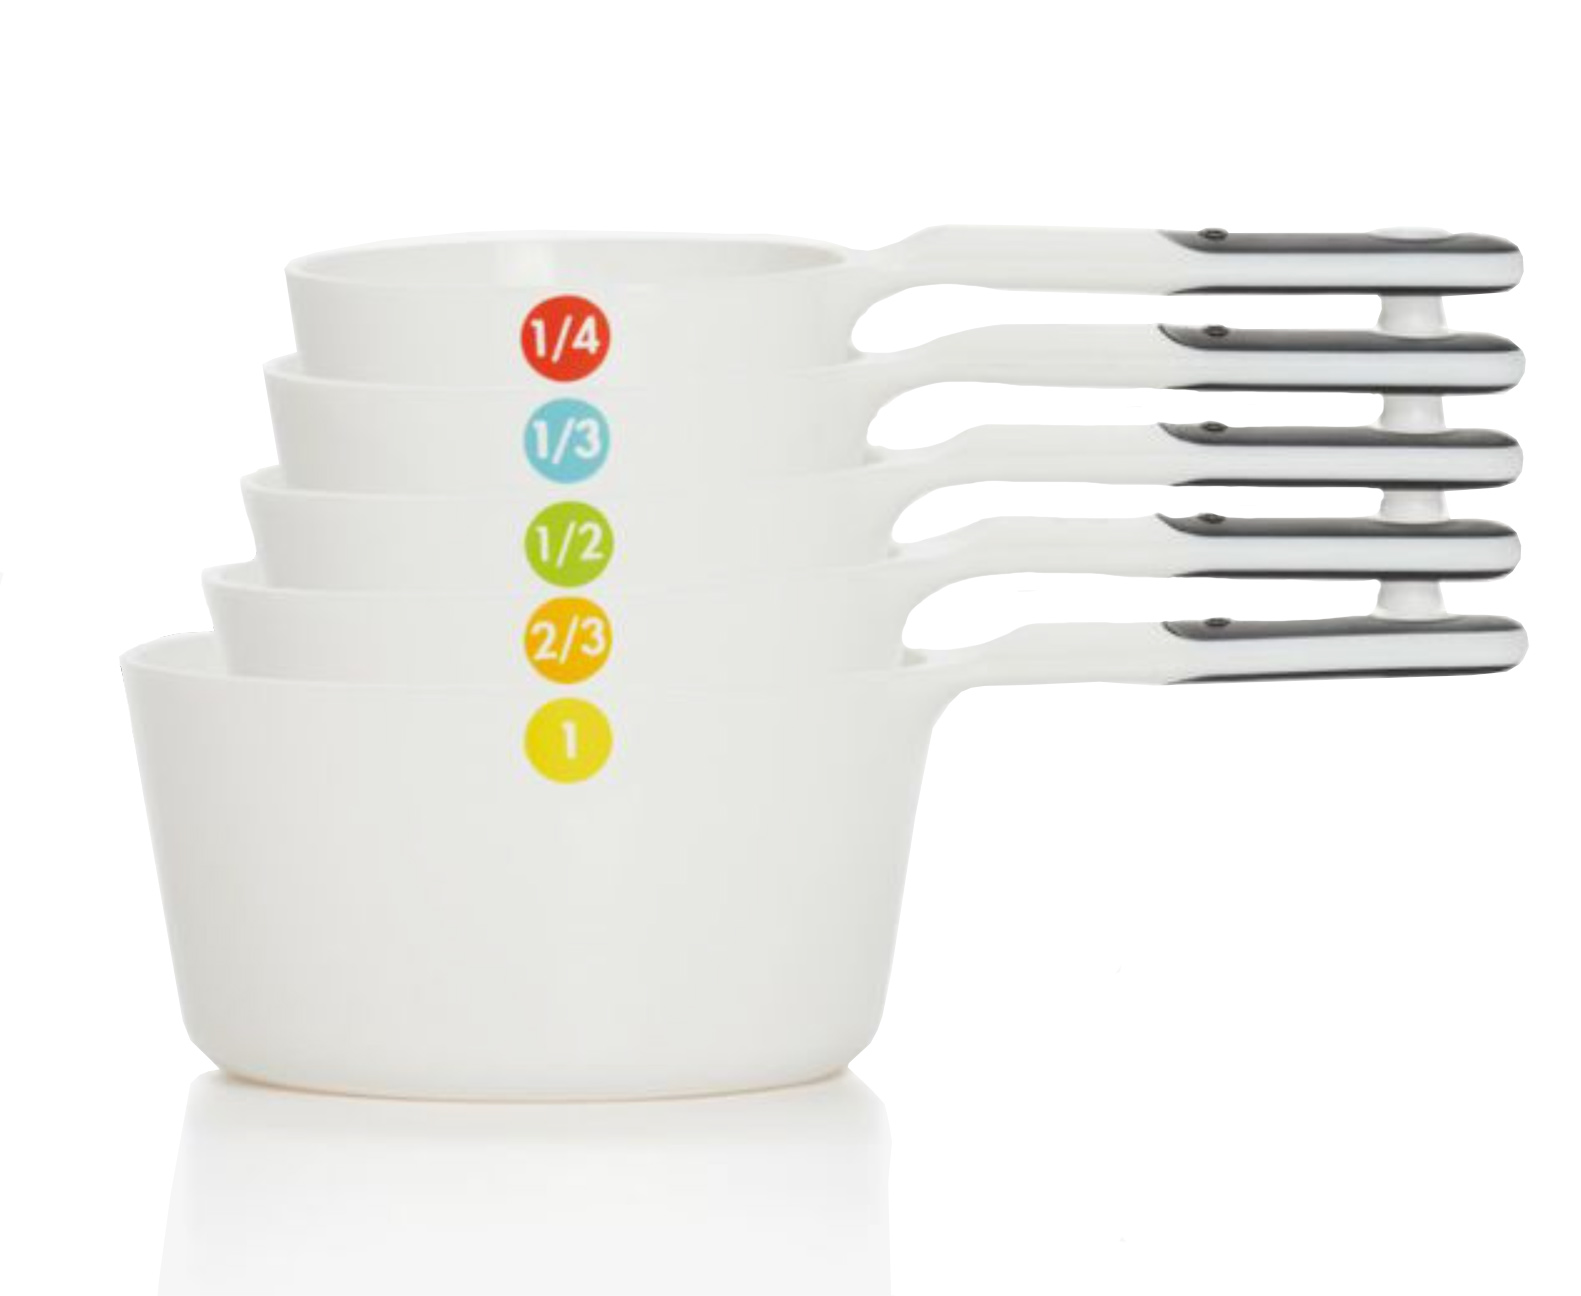 6 Piece Plastic Measuring Cups Set - White - Lodging Kit Company